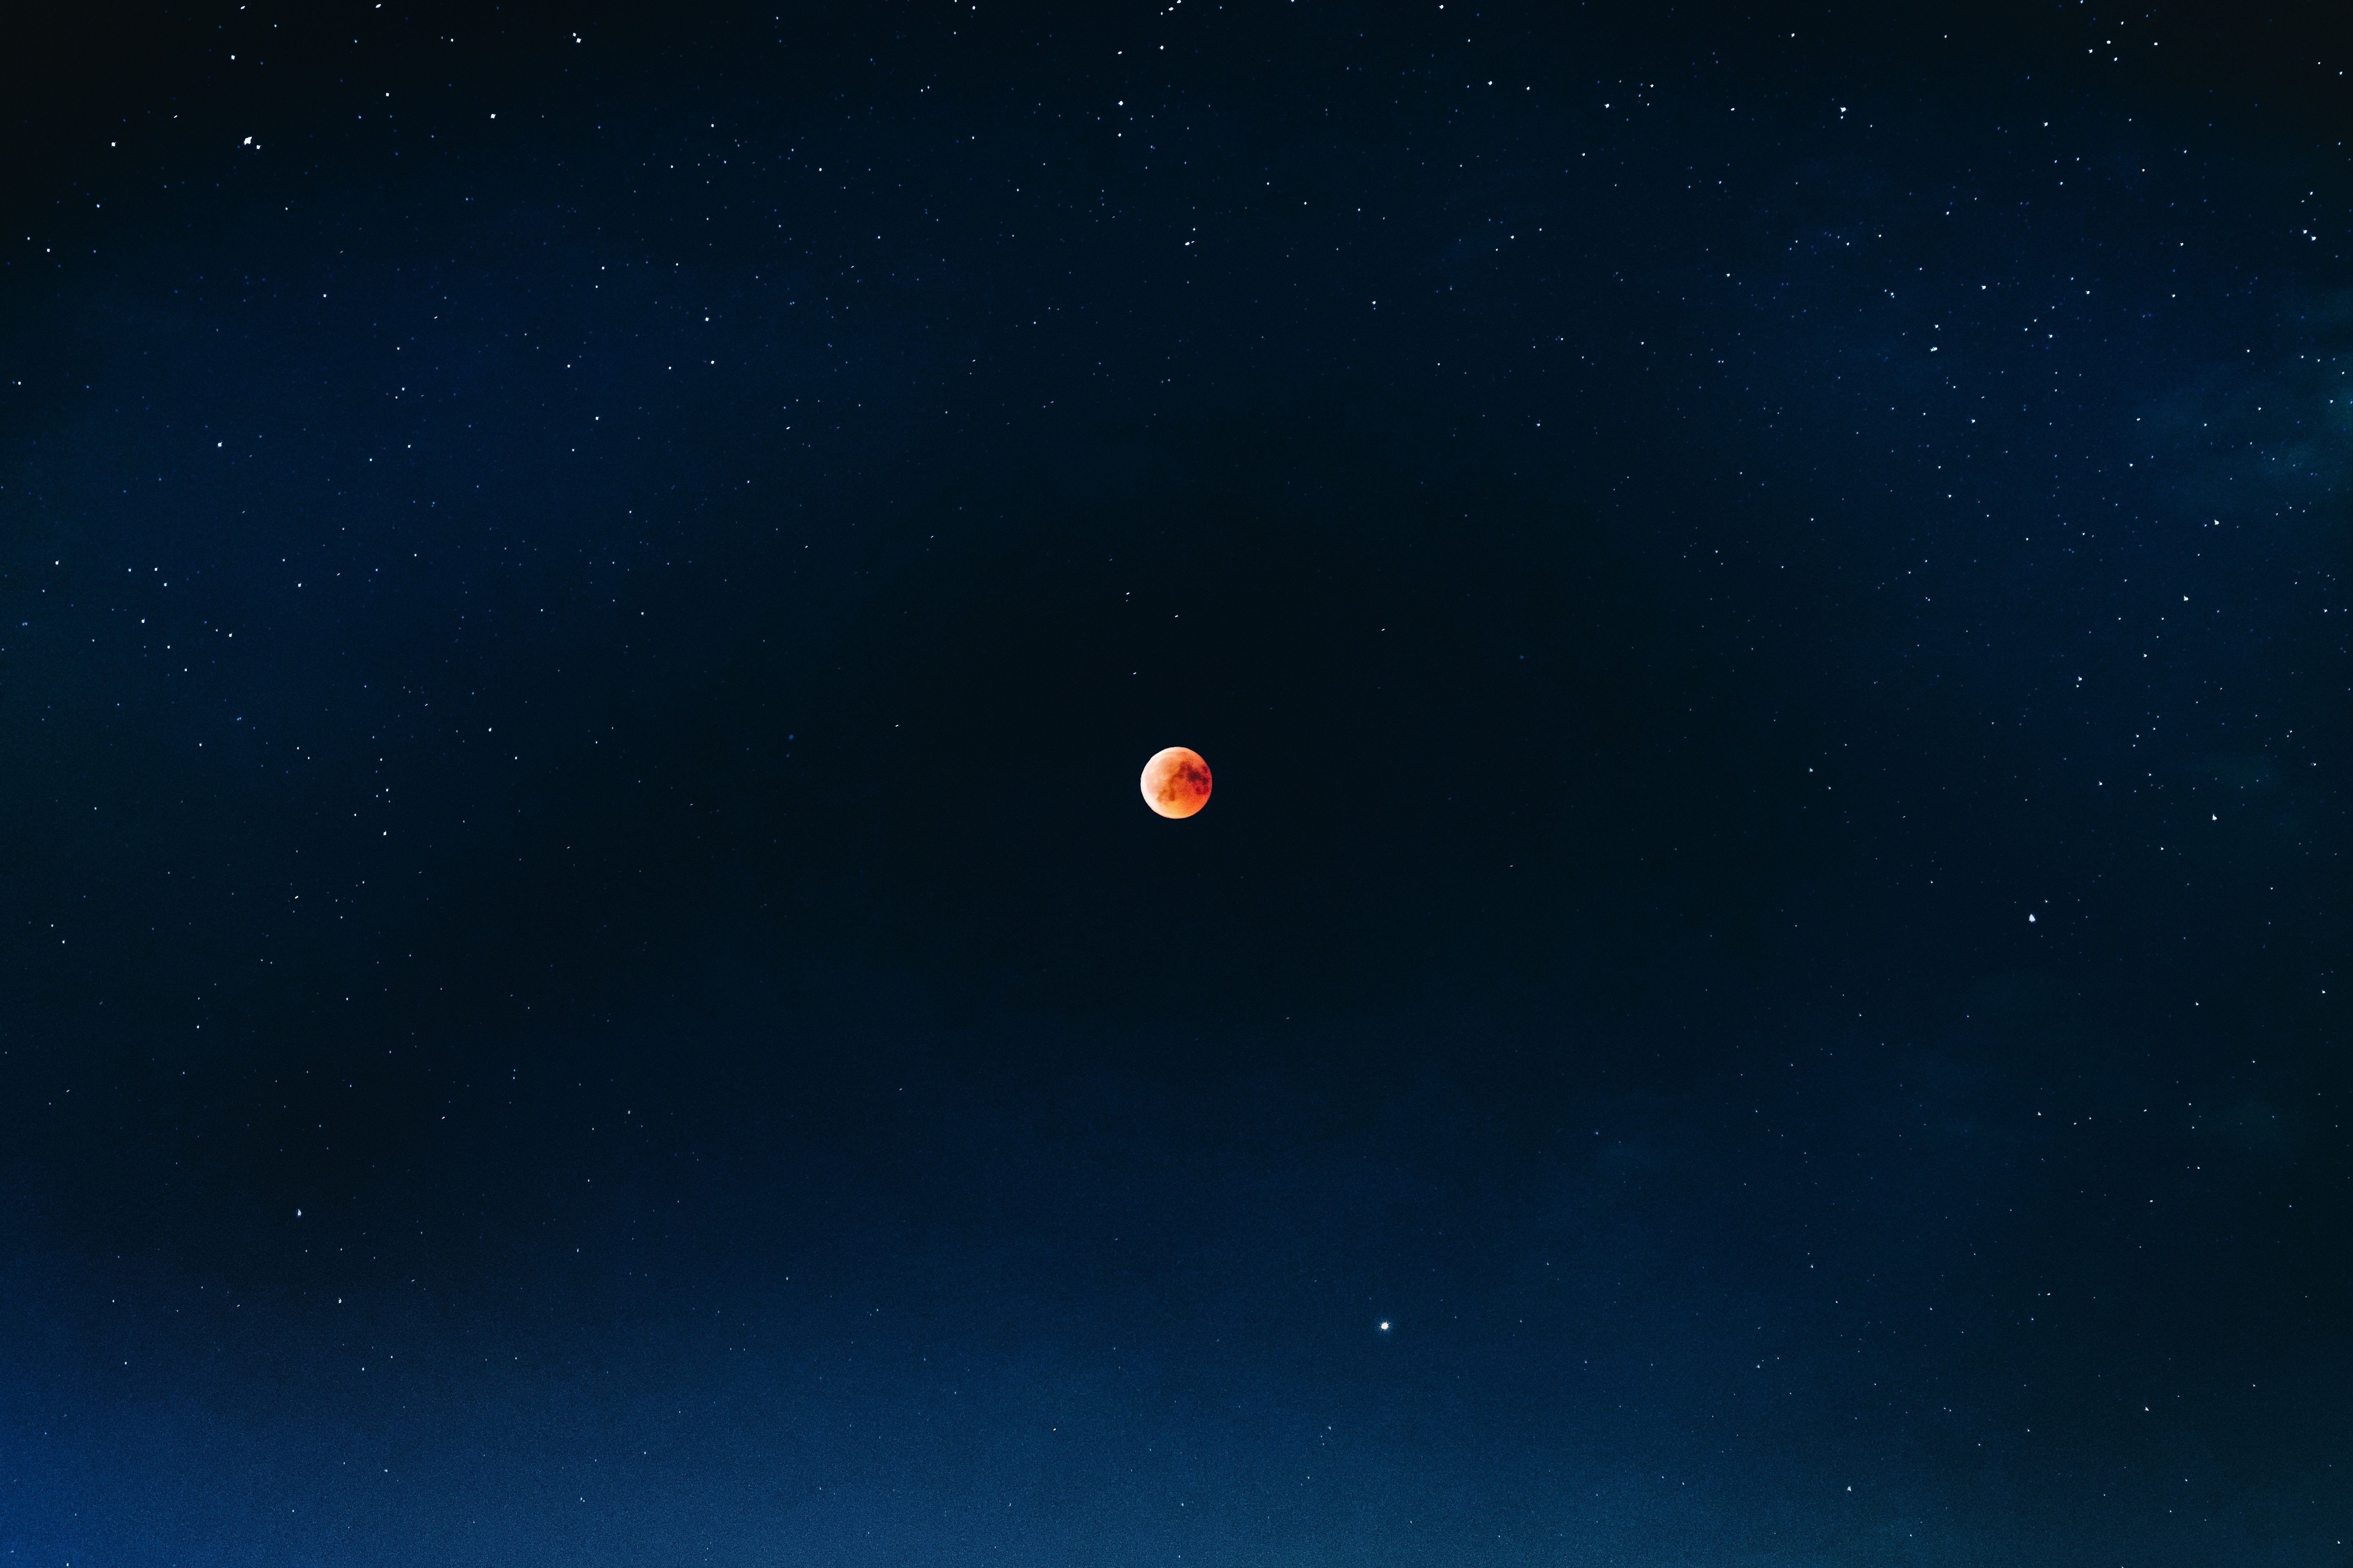 5569x3712 PNG image, light, universe, lunatic, eclipse, star, supermoon, panorama, dark, sky, darkness, space, wallpaper, planet, red, night, moon, blue, bloodymoon Gallery HD Wallpaper